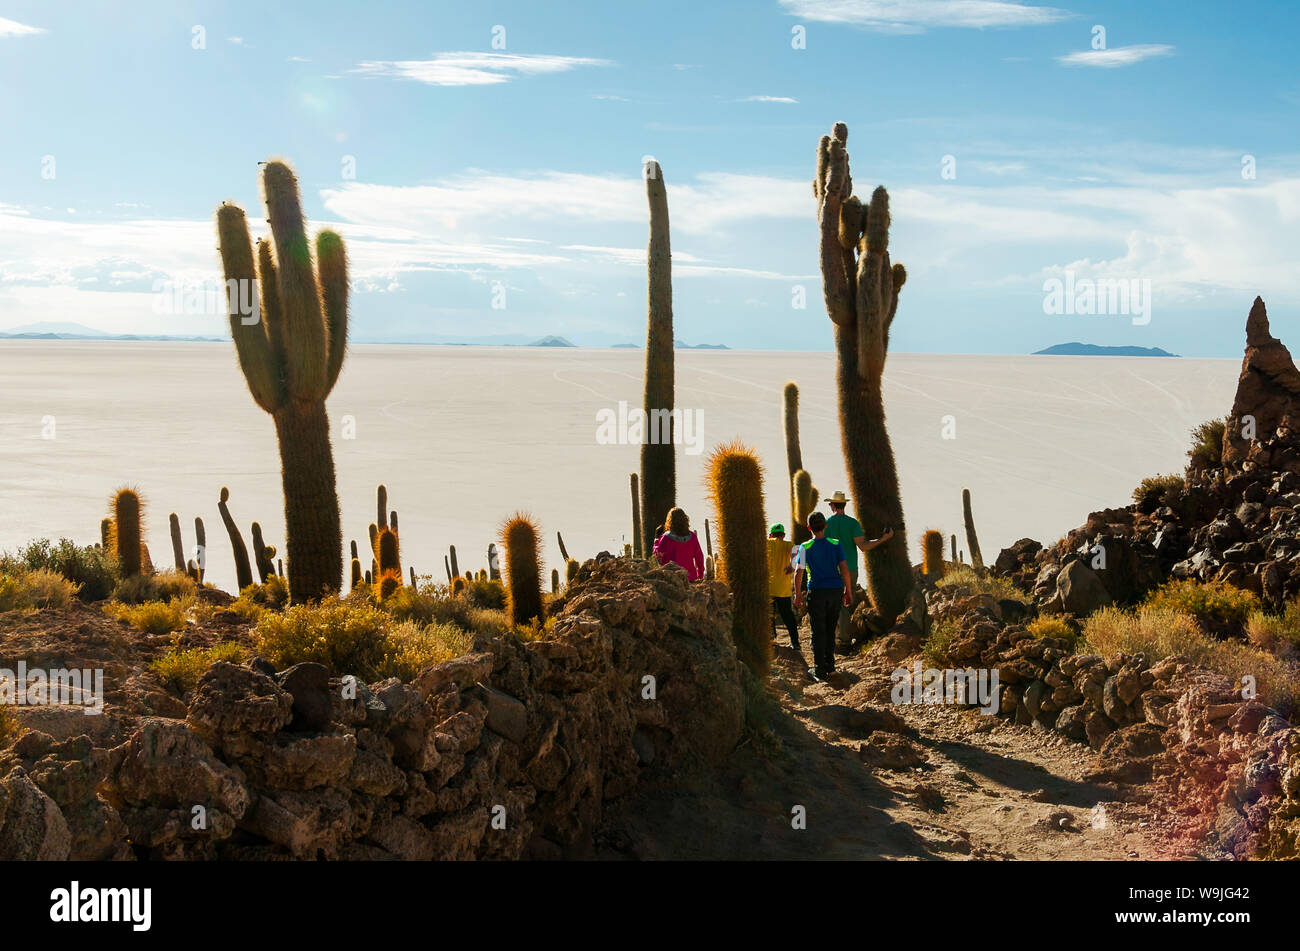 Family among giant cactuses in the salt flats of Bolivia Stock Photo